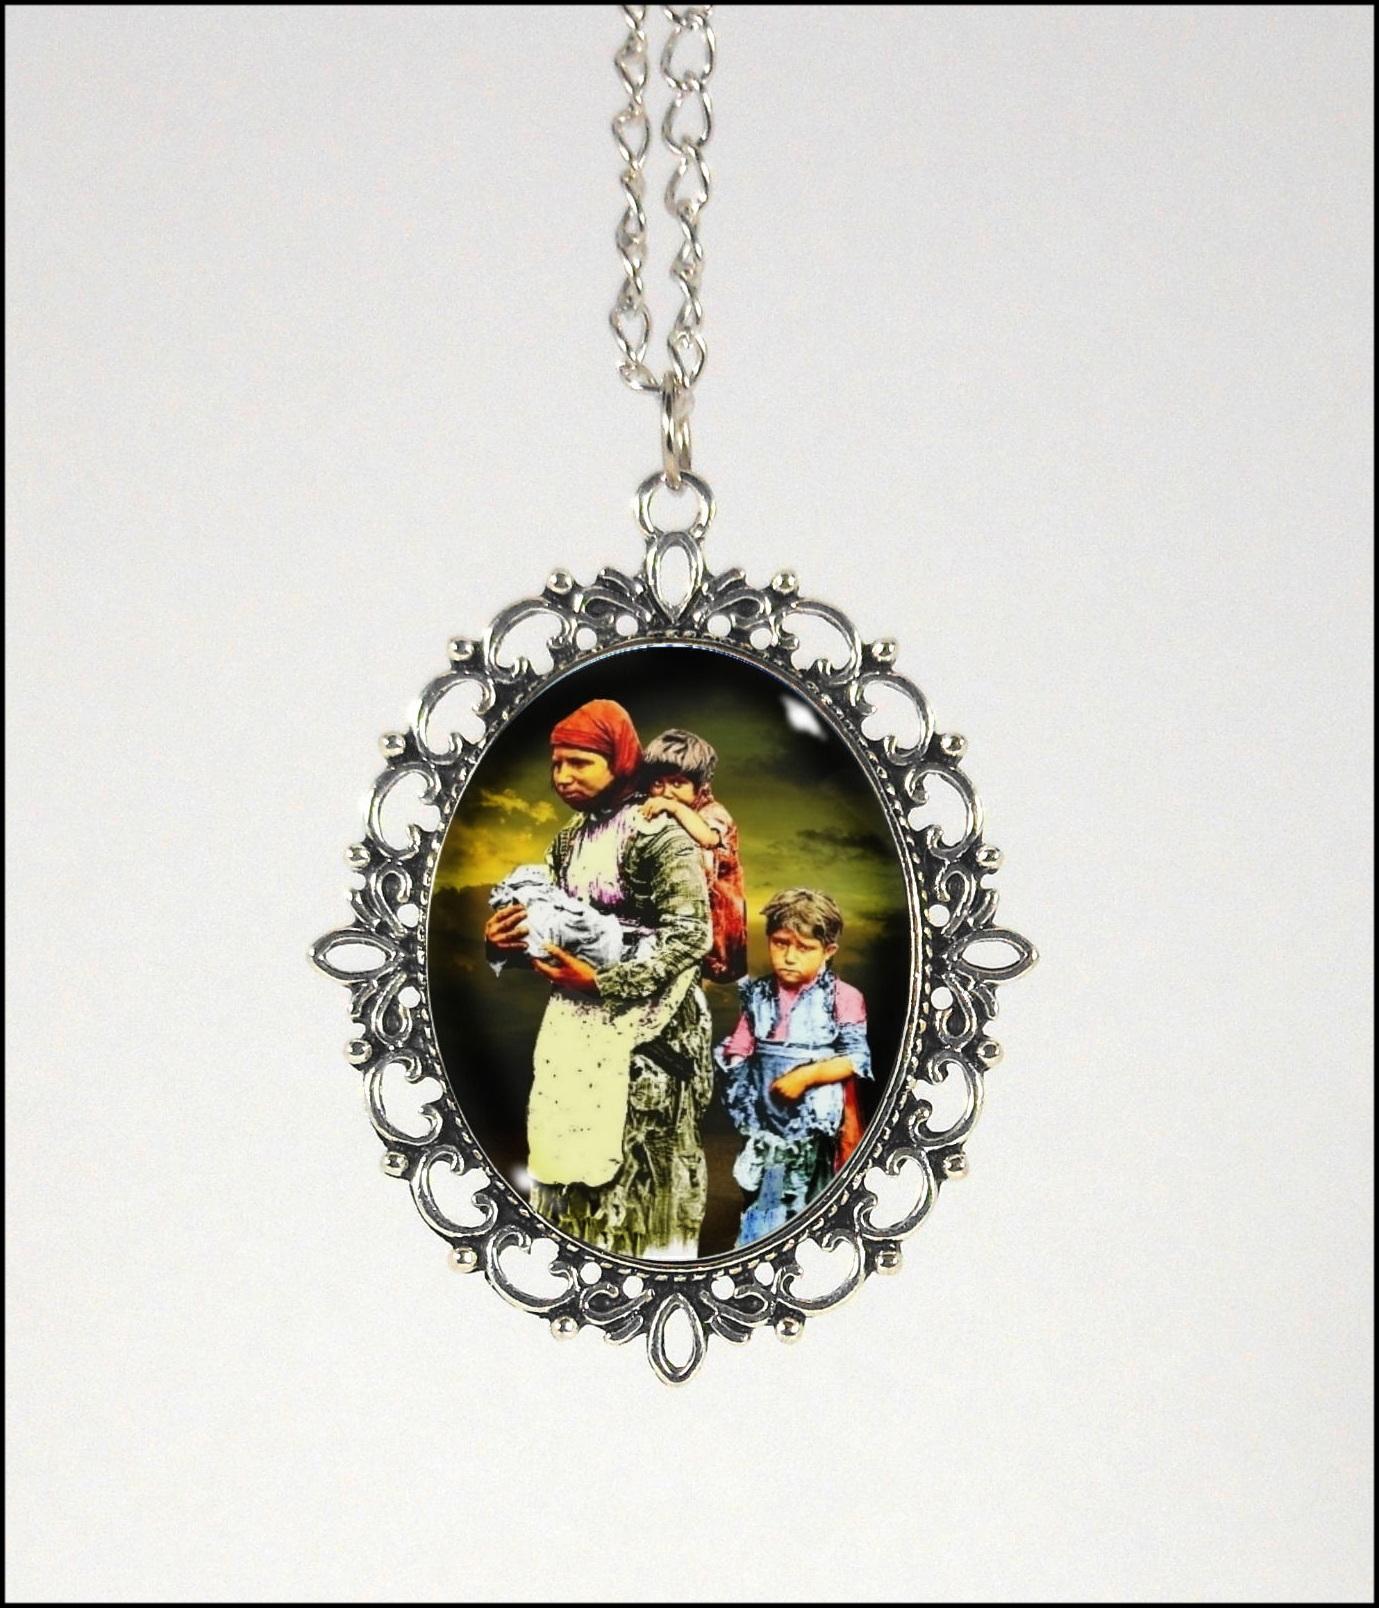 A picture containing text, chain, accessory, locket

Description automatically generated